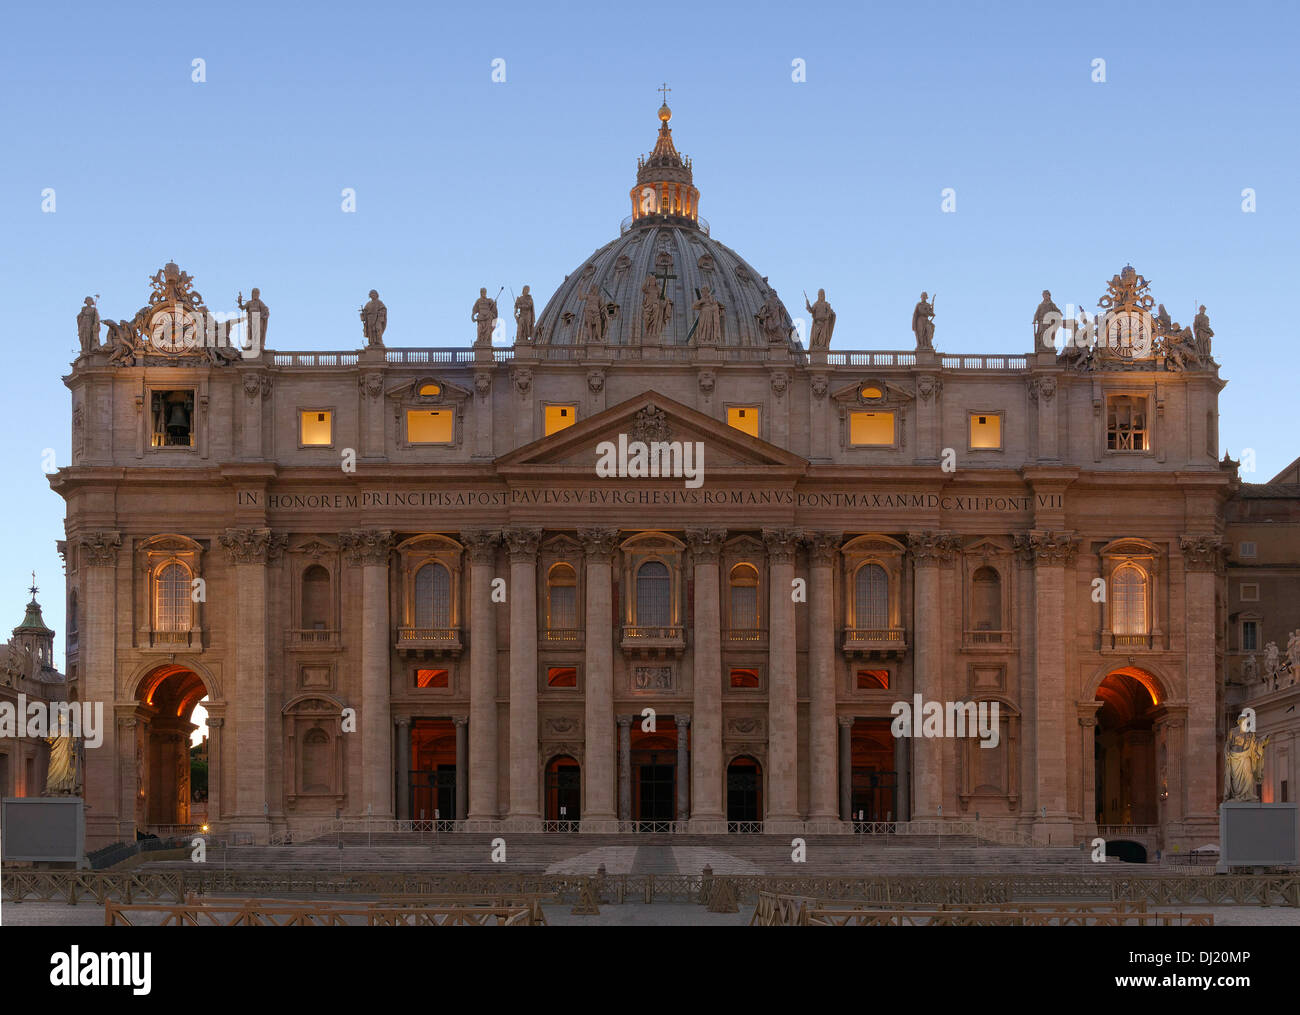 Facade of Saint Peter's Basilica in Rome, beginning of the evening. Vatican City. Stock Photo